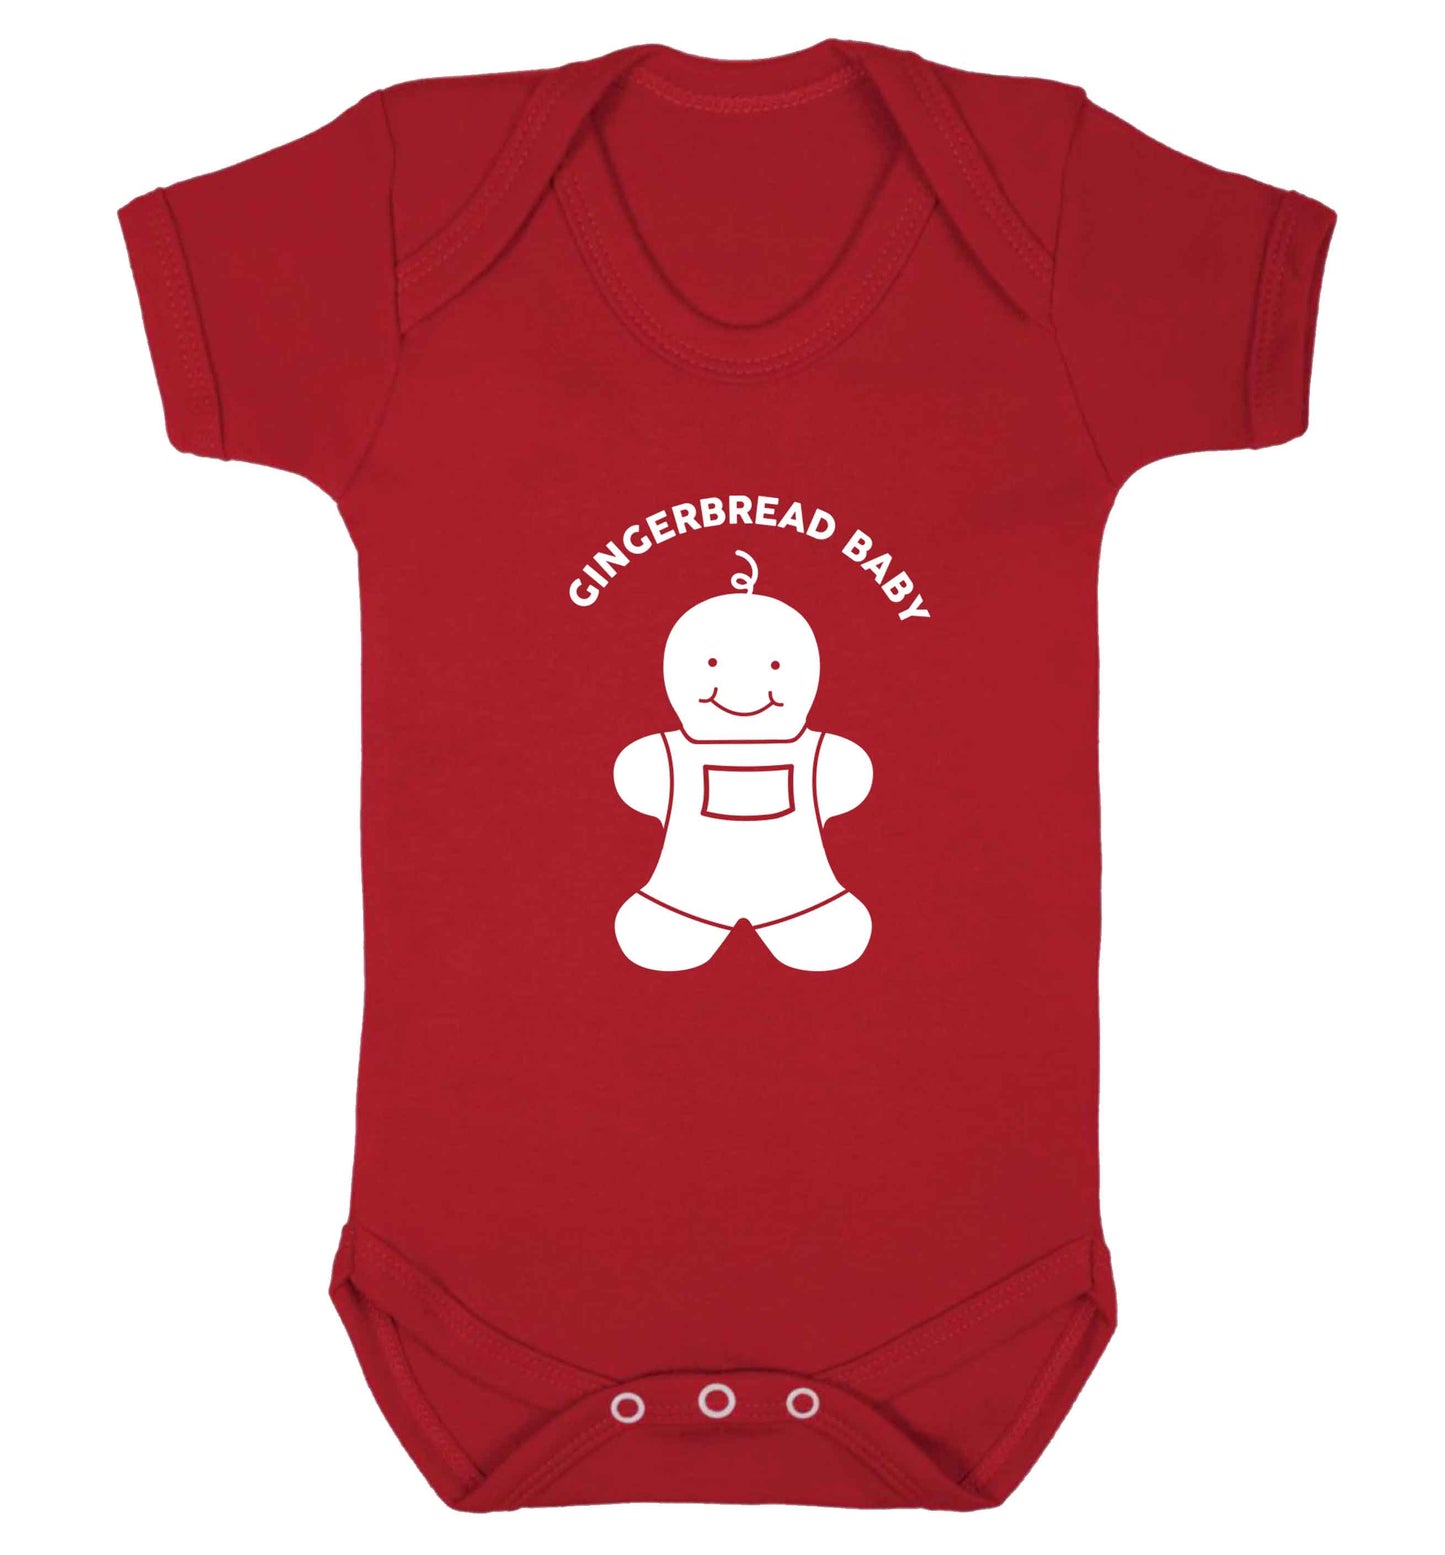 Gingerbread baby baby vest red 18-24 months